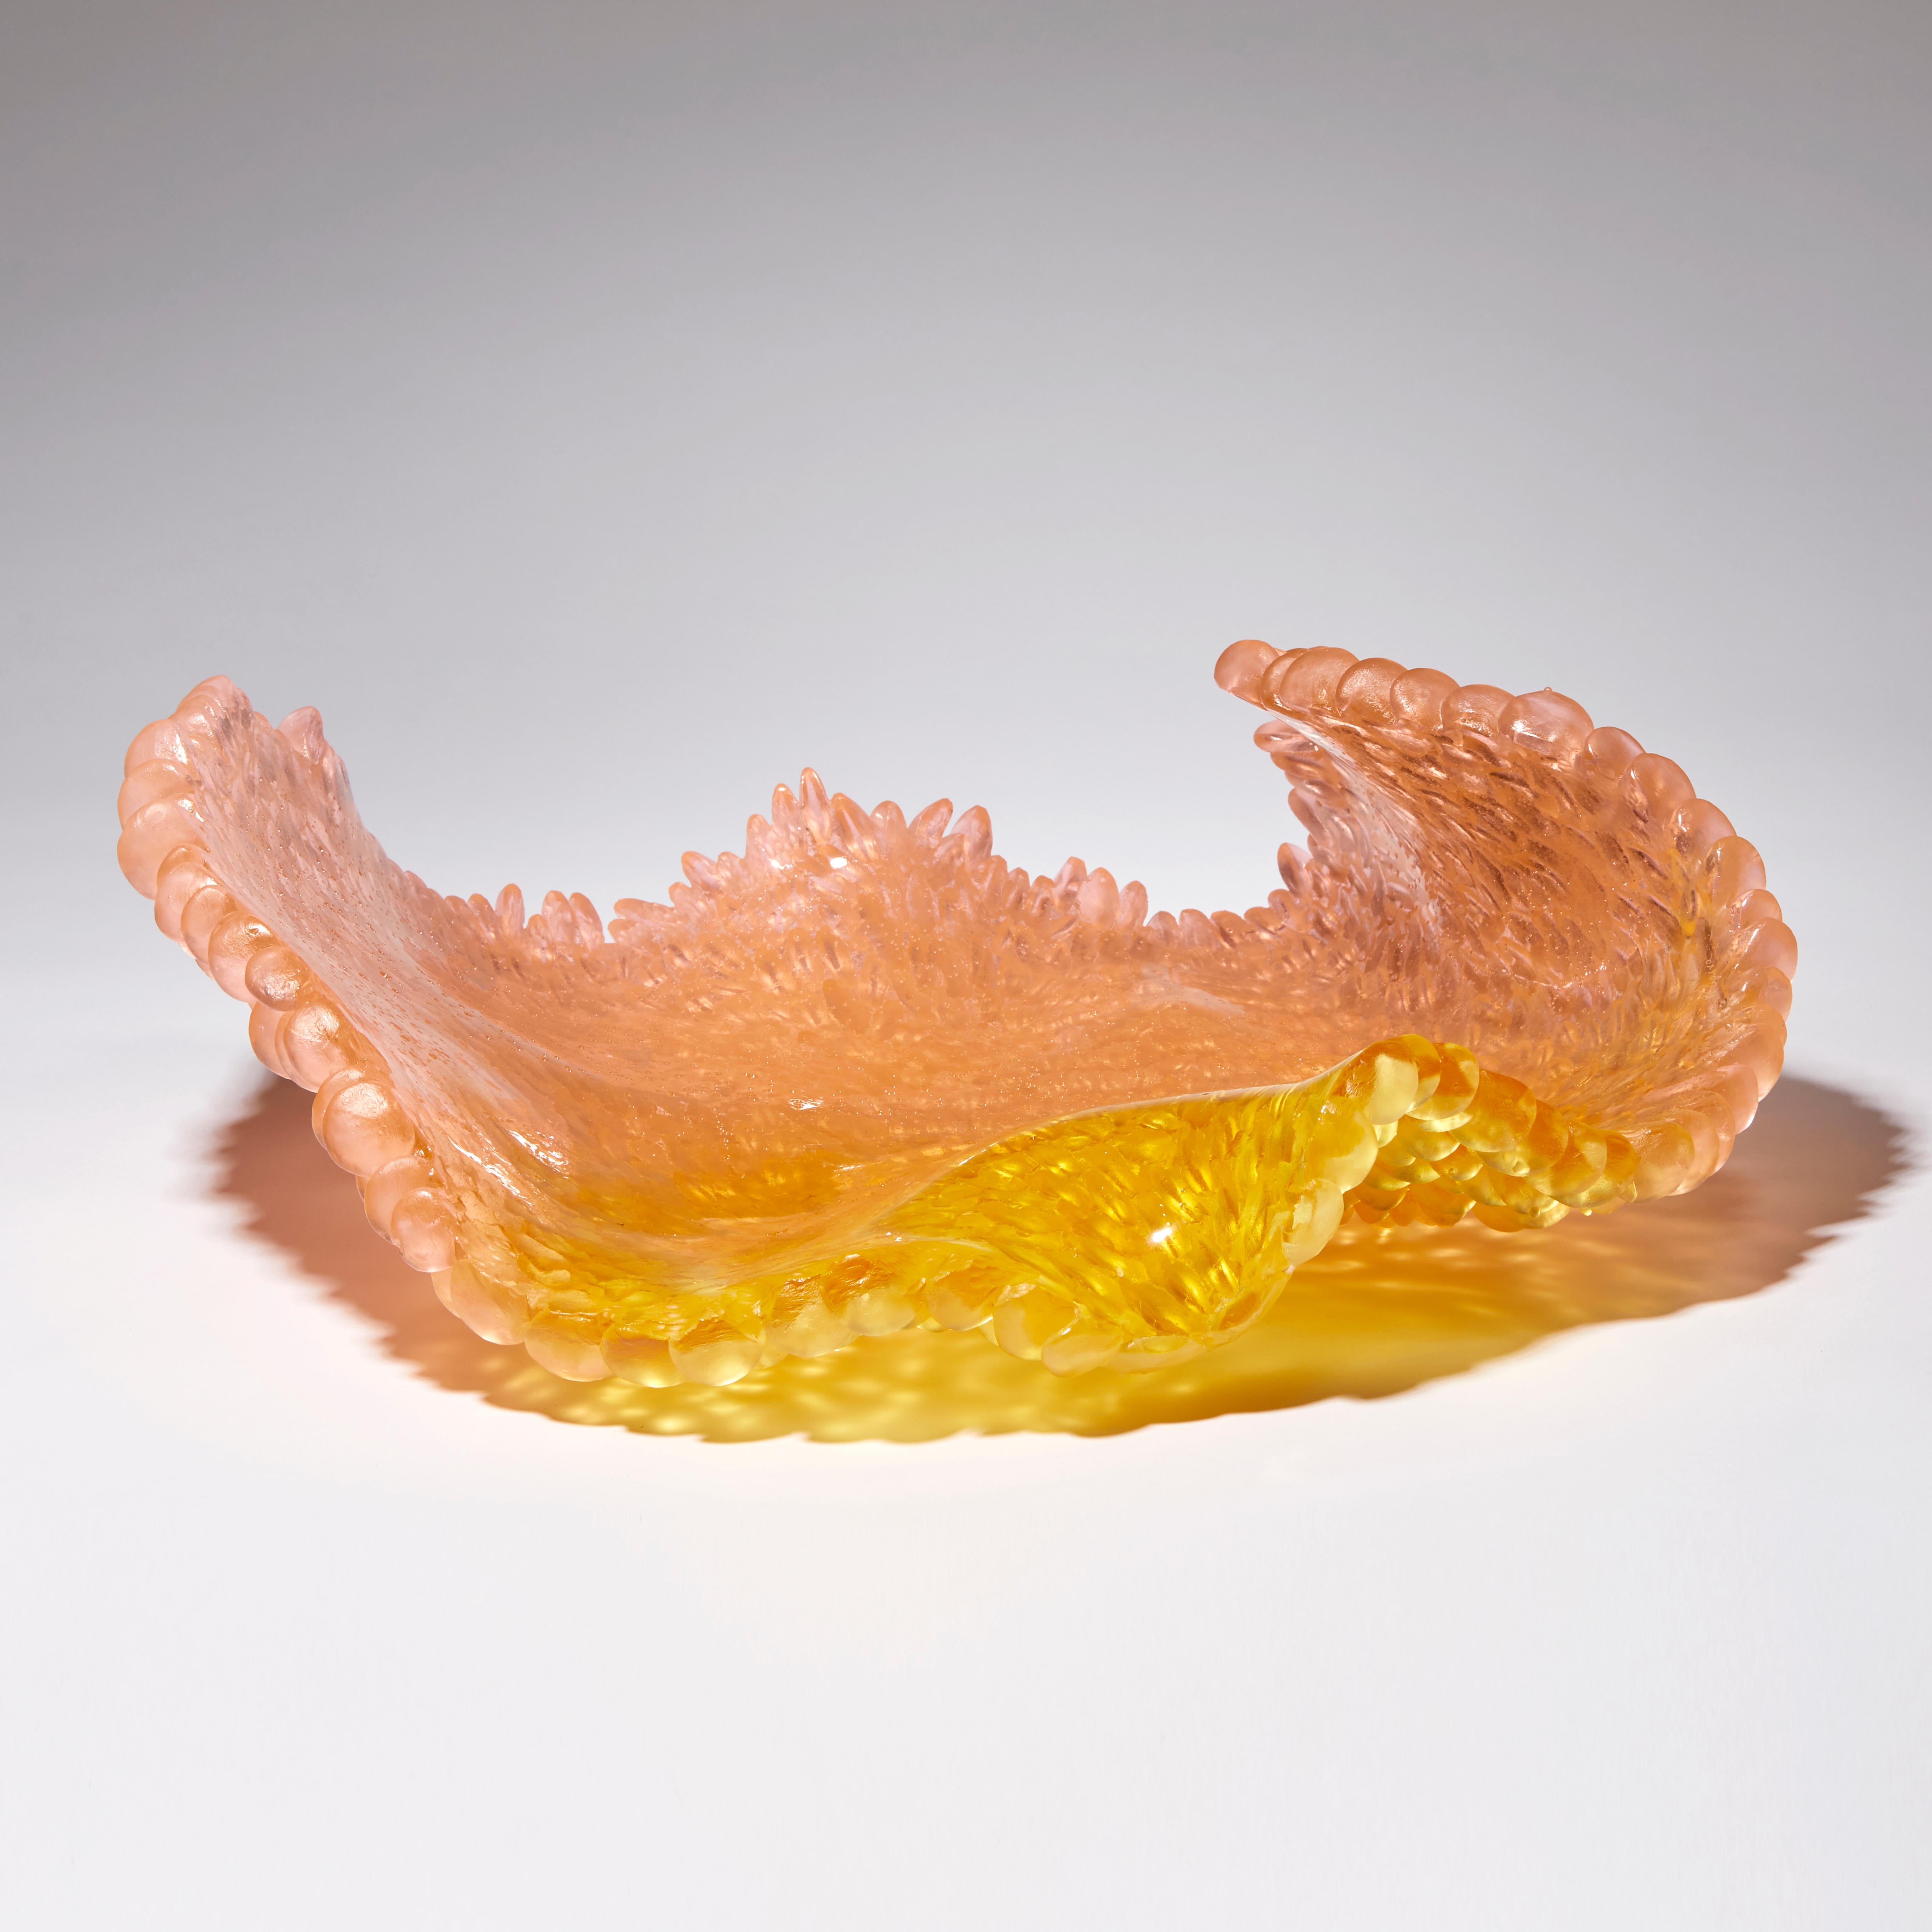 Orange rose is a unique textured glass sculpture in amber, gold and peach by the British artist Nina Casson McGarva.

Casson McGarva firstly casts her glass in a flat mould where she introduces all of the beautifully detailed, scaled surface